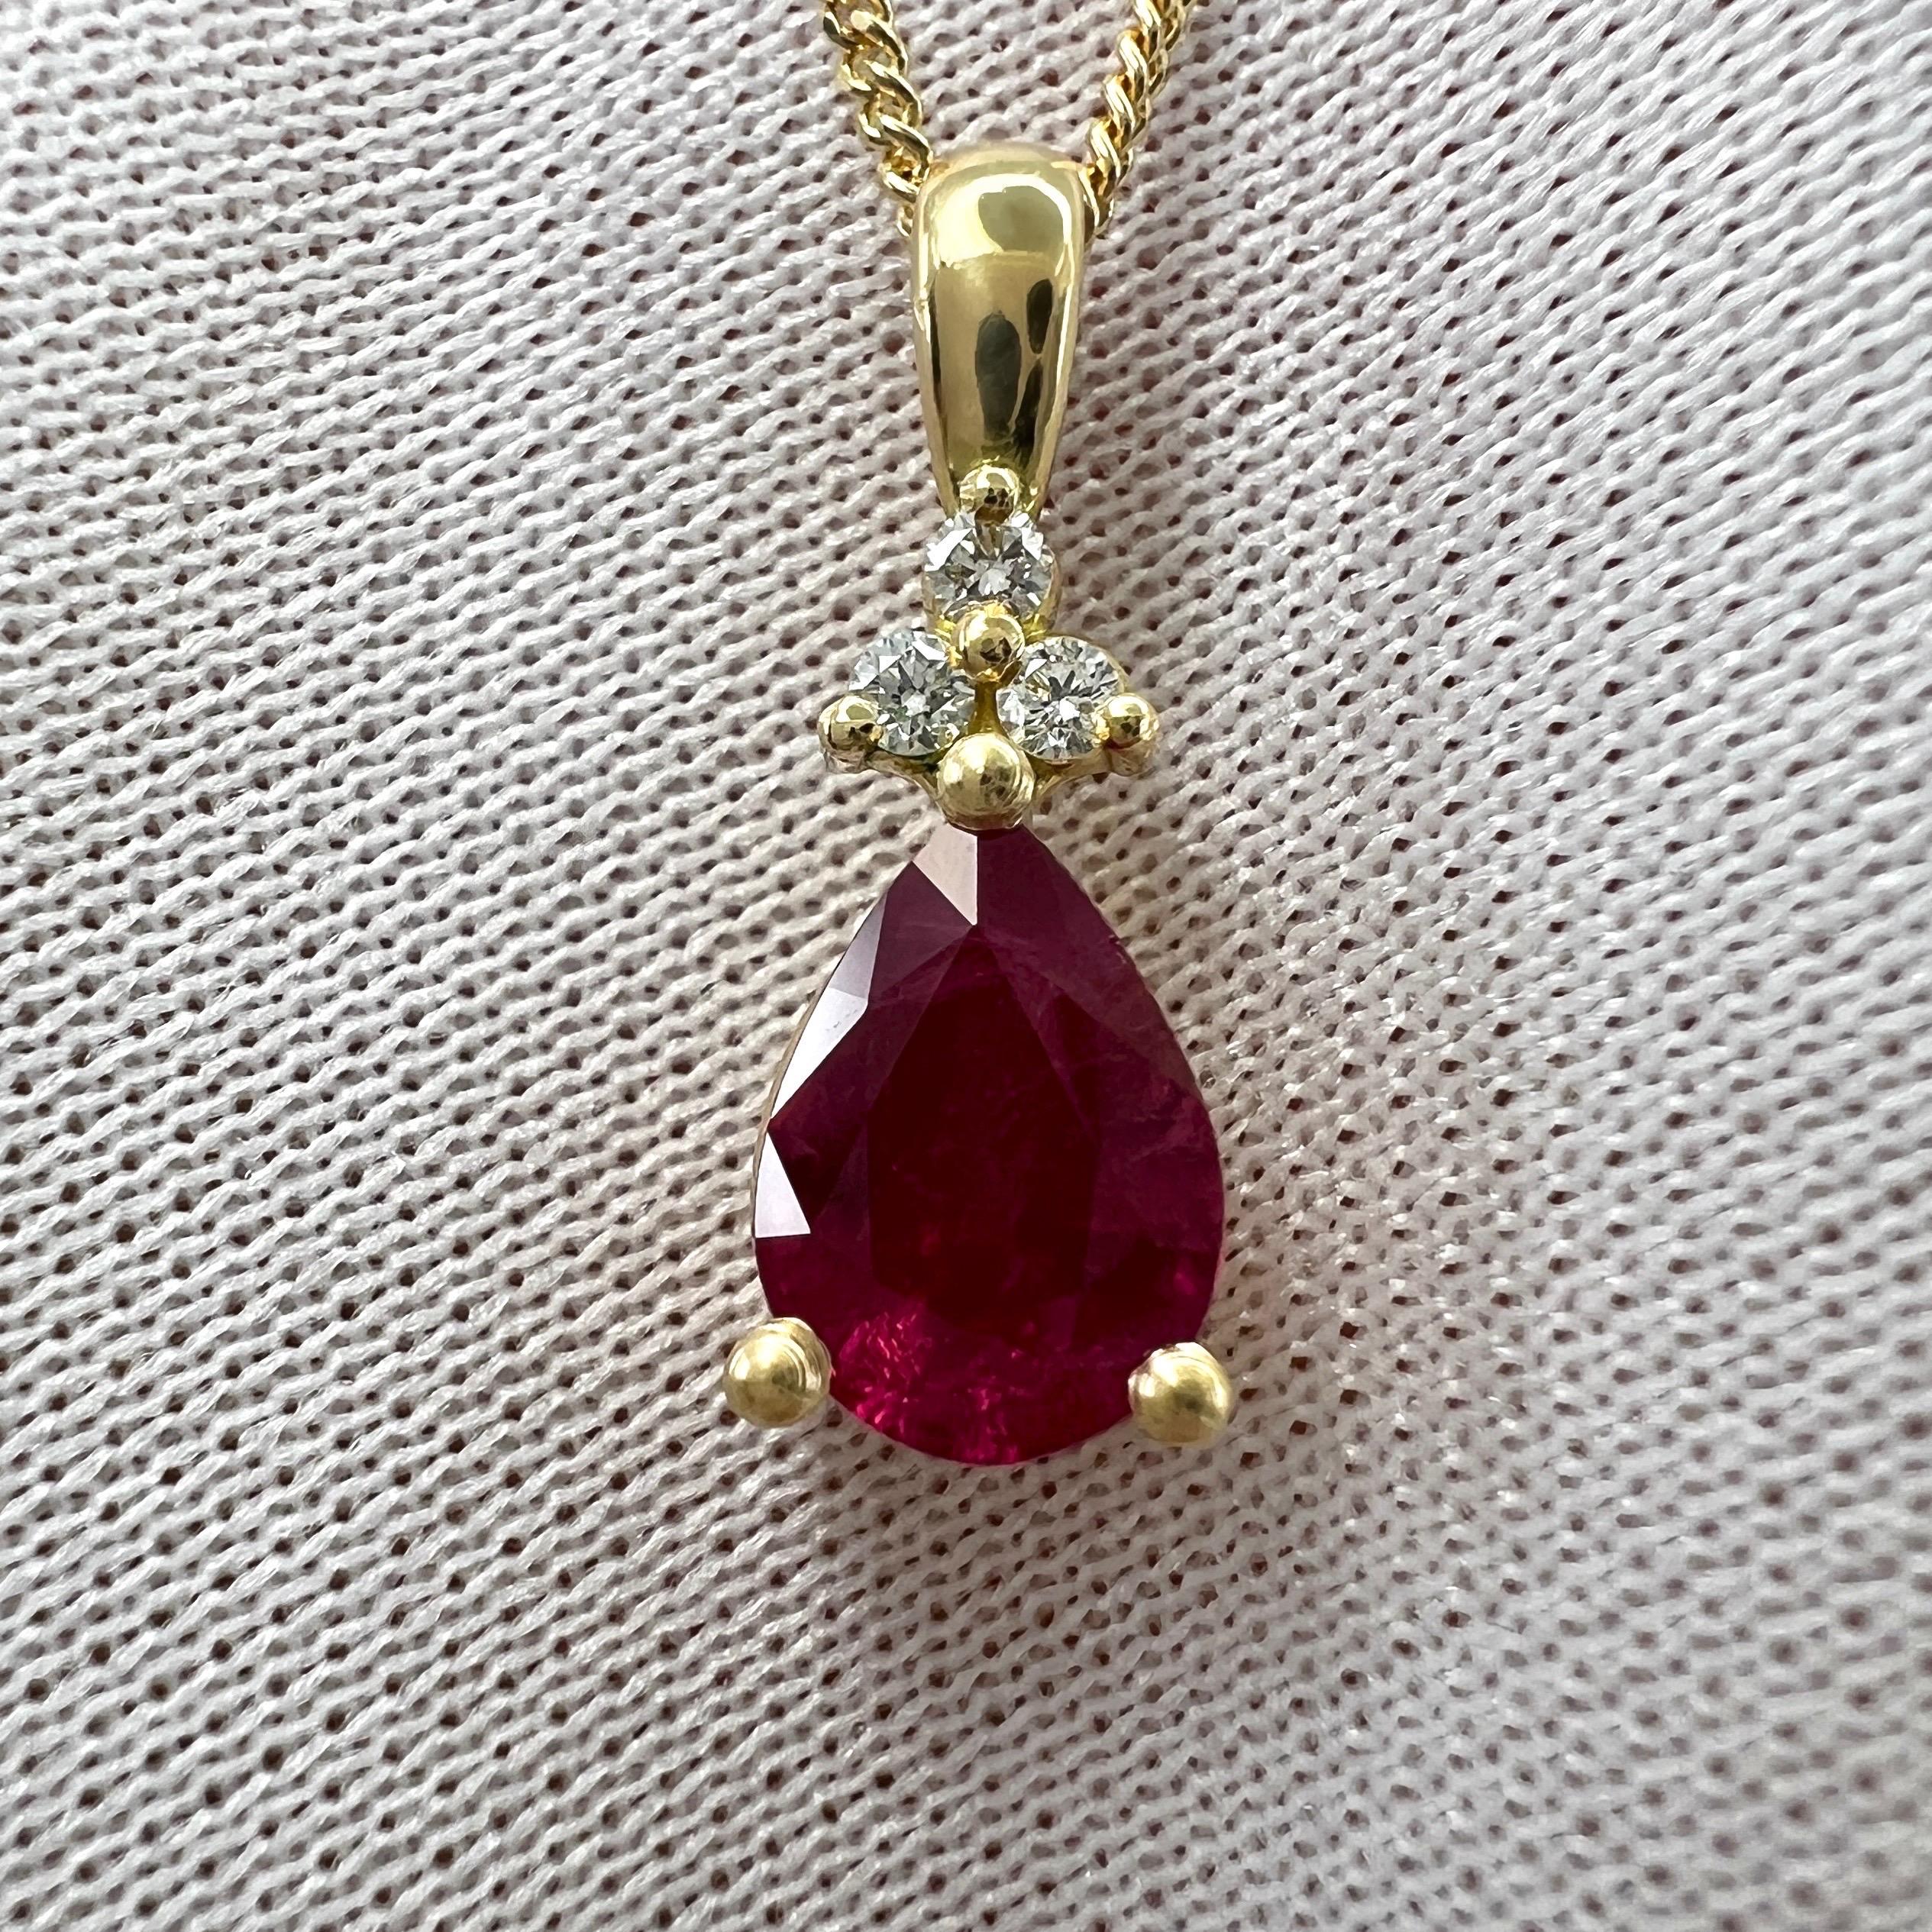 Natural Pear Cut Deep Pink Red Ruby And Diamond 18k Yellow Gold Pendant Necklace.

This piece features a beautiful 1.37 Carat natural ruby with a deep pinkish red colour, this stone has an excellent pear cut measuring 8x5.5mm. Some small natural